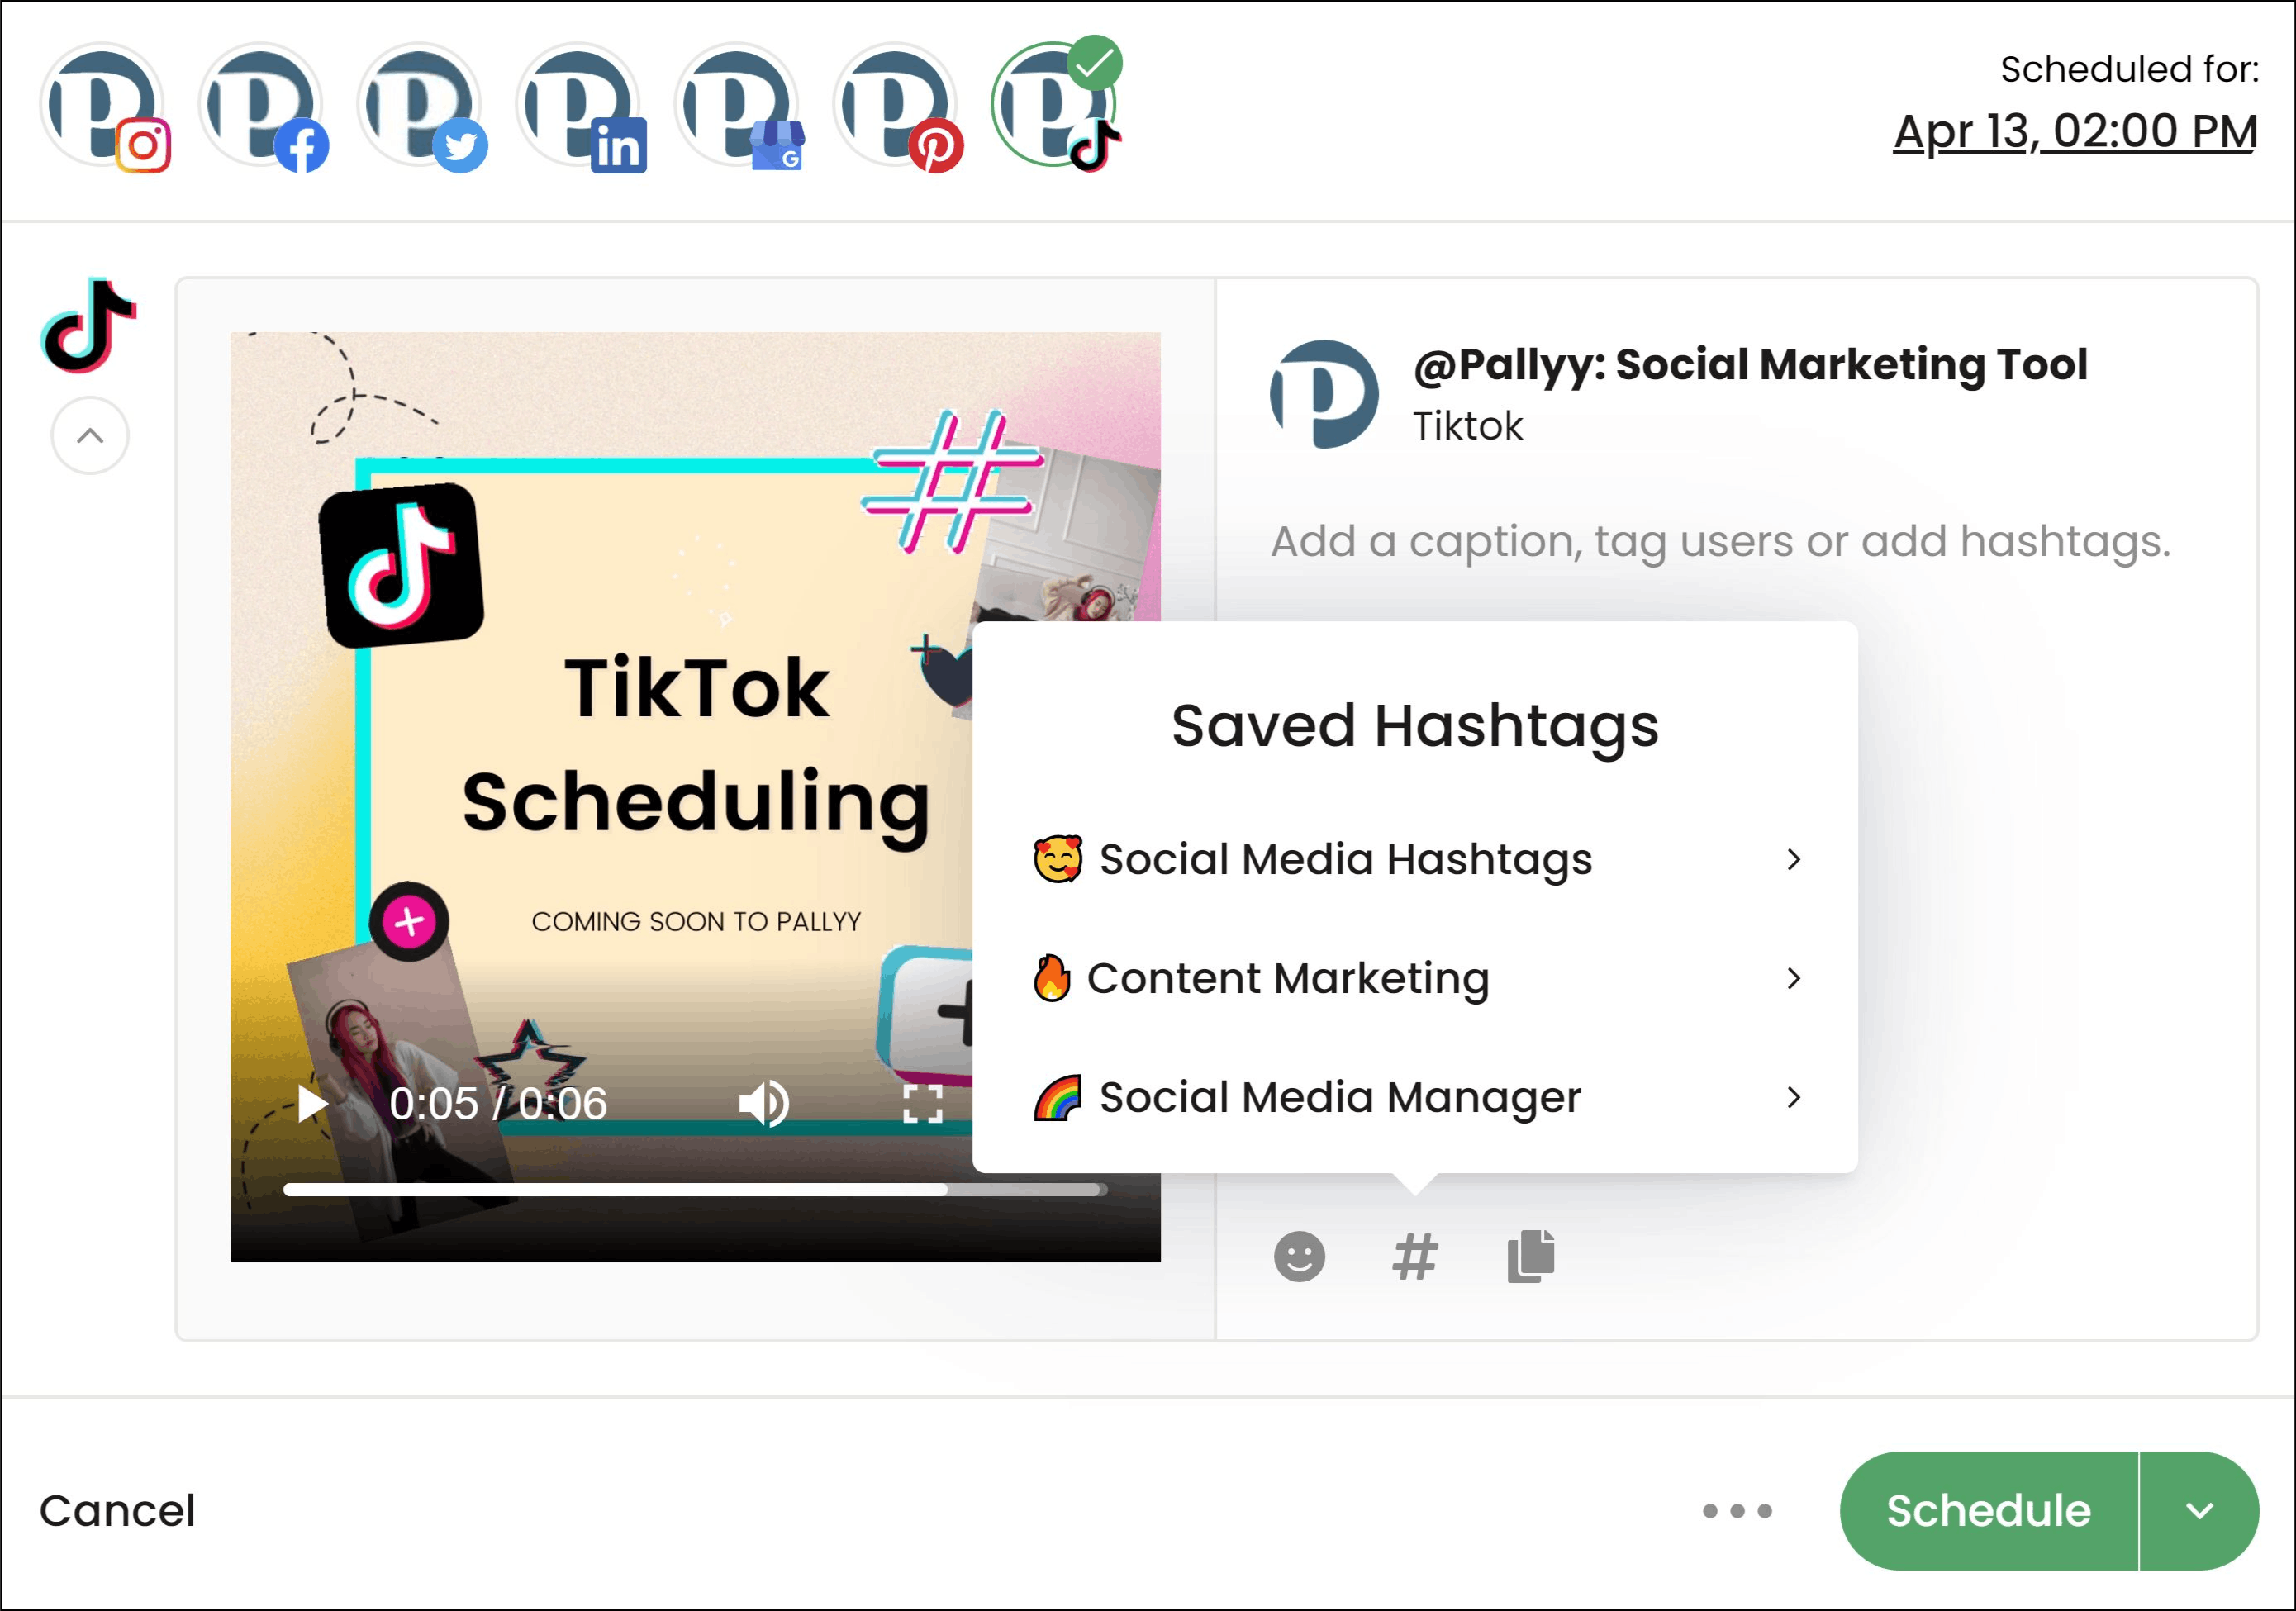 Add a caption and hashtags when scheduling a TikTok post.